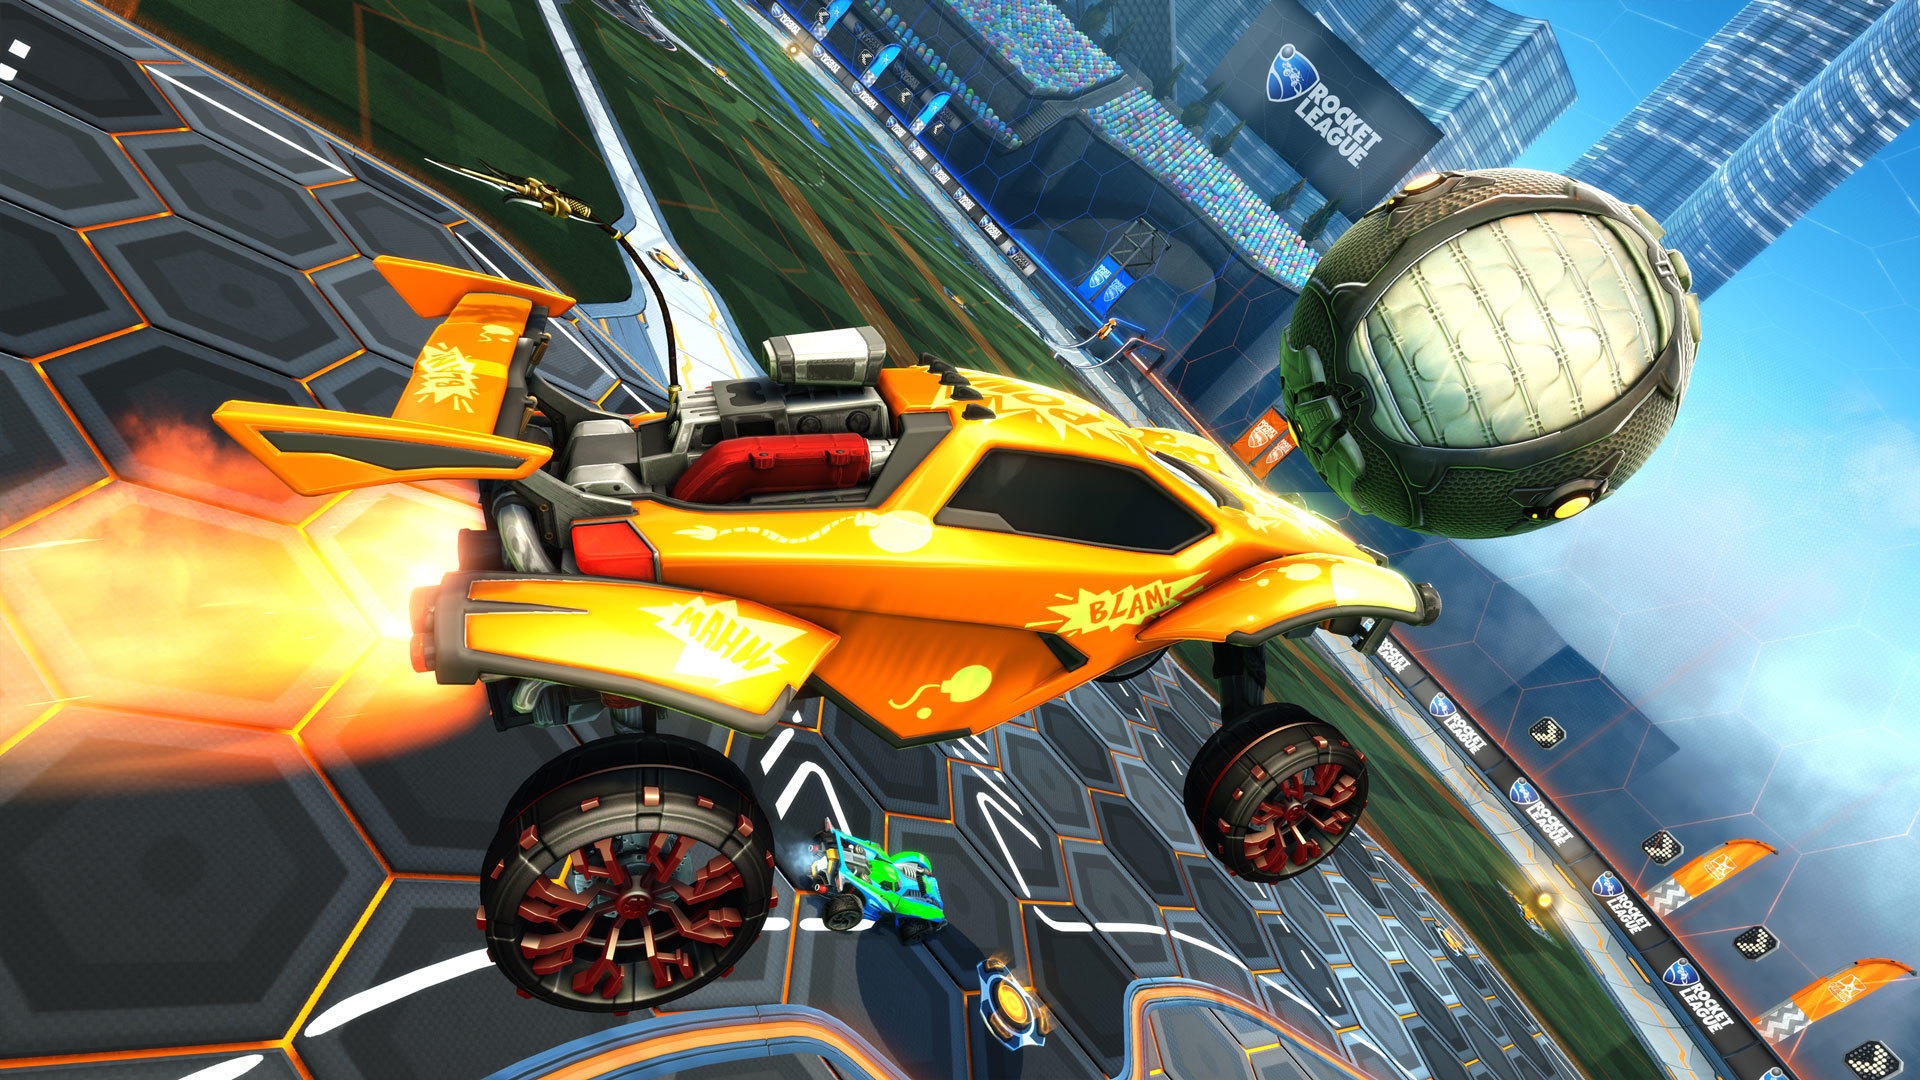 Today, we are going to be covering how to get Exotic Drops in Rocket League, as well as answer some questions like what items are exotic in Rocket League.